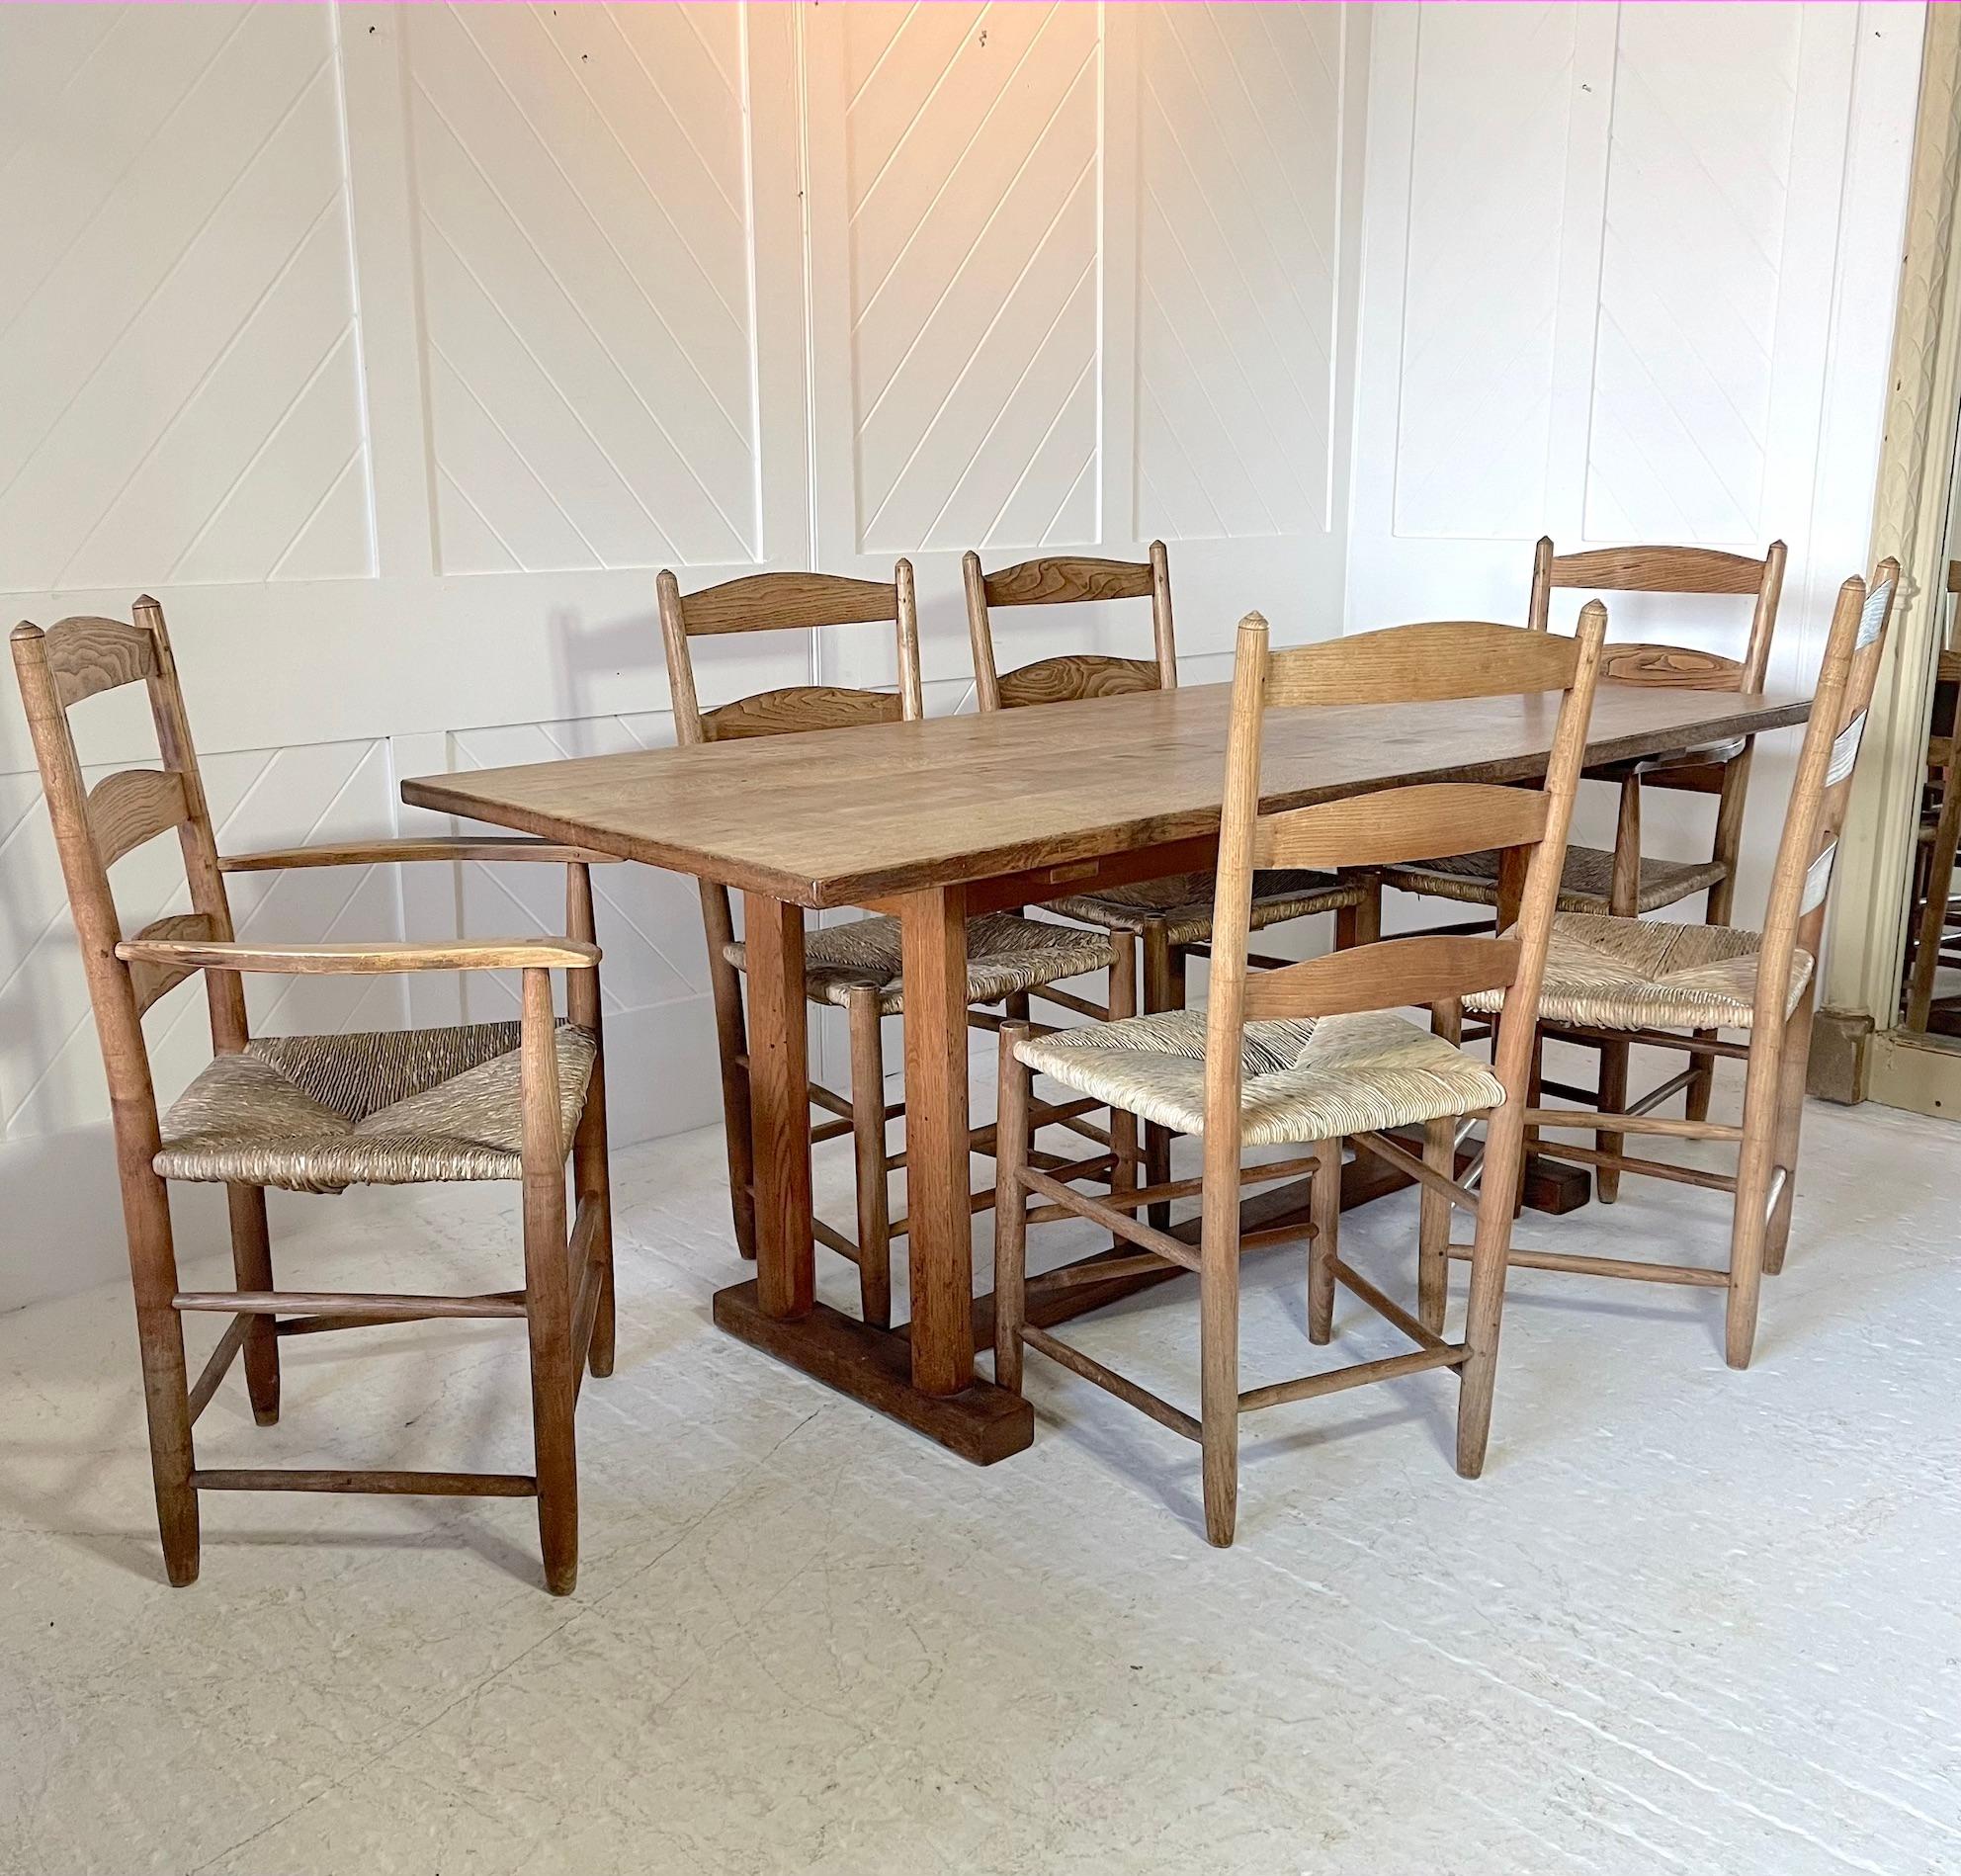 English Cotswold School Set of 6 Chairs by Ernest Gimson